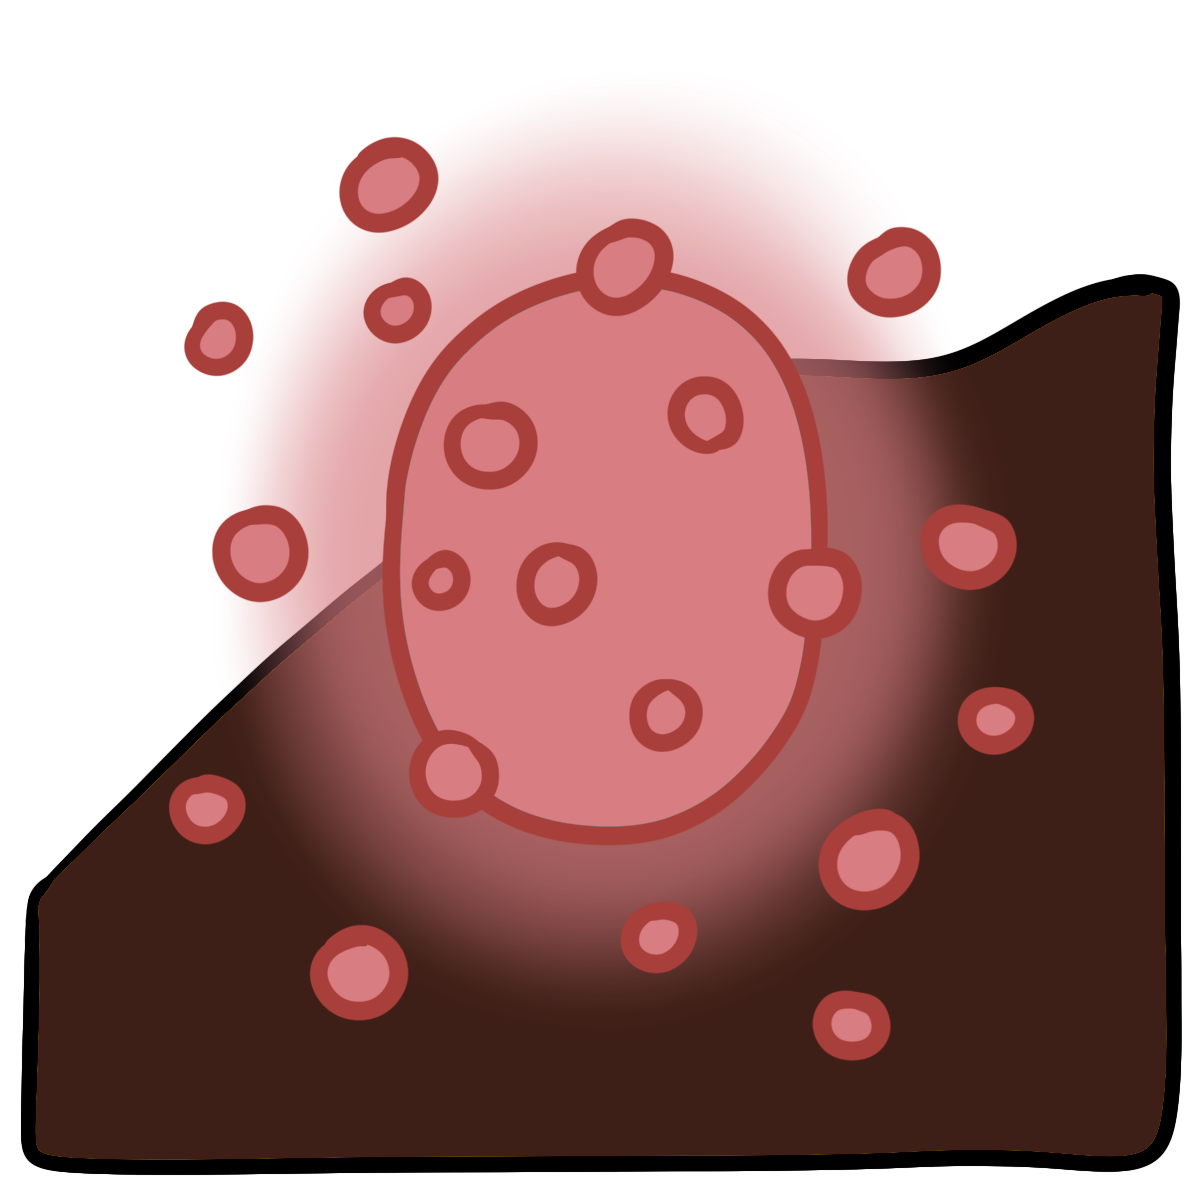 A pink glowing oval with pink dots around it. Curved dark brown skin fills the bottom half of the background.